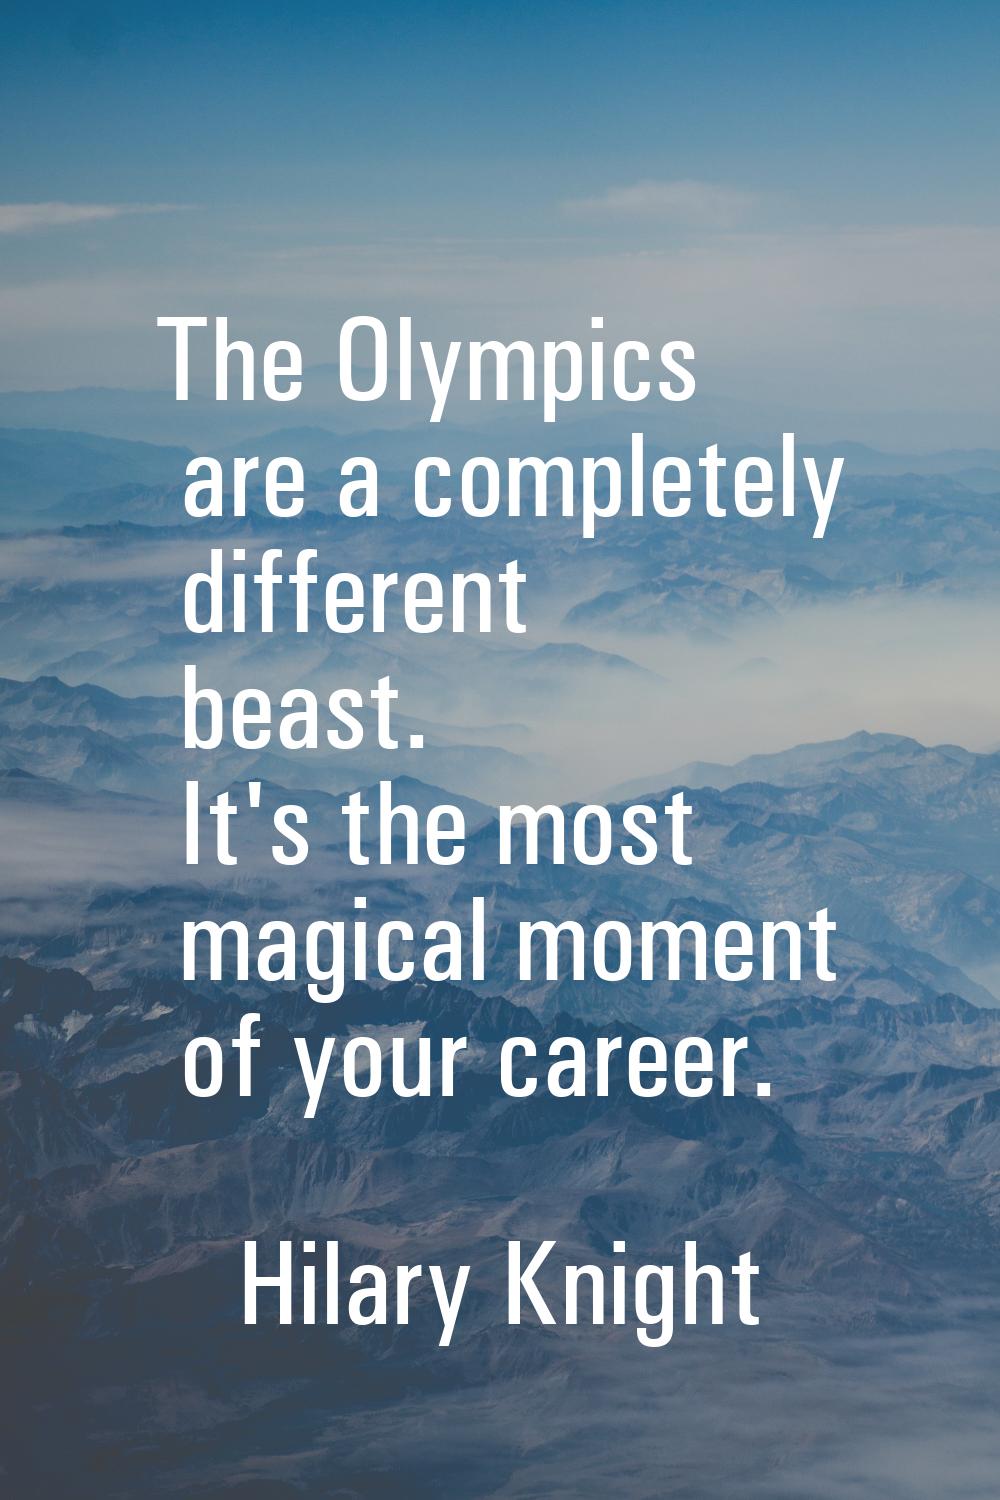 The Olympics are a completely different beast. It's the most magical moment of your career.